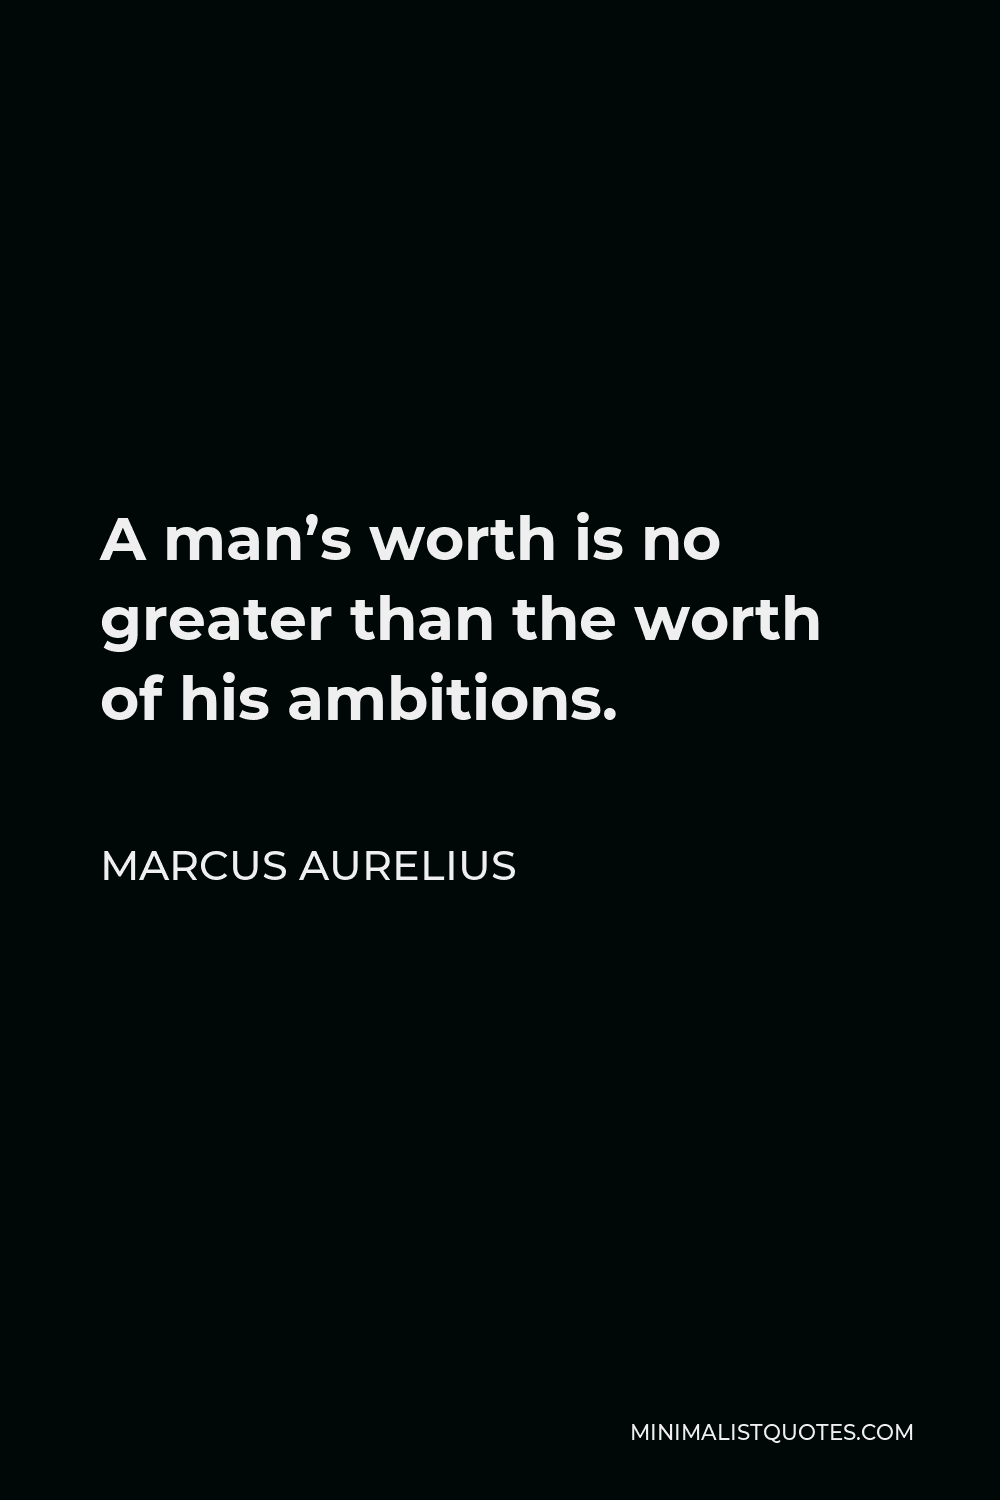 Marcus Aurelius Quote - A man’s worth is no greater than the worth of his ambitions.